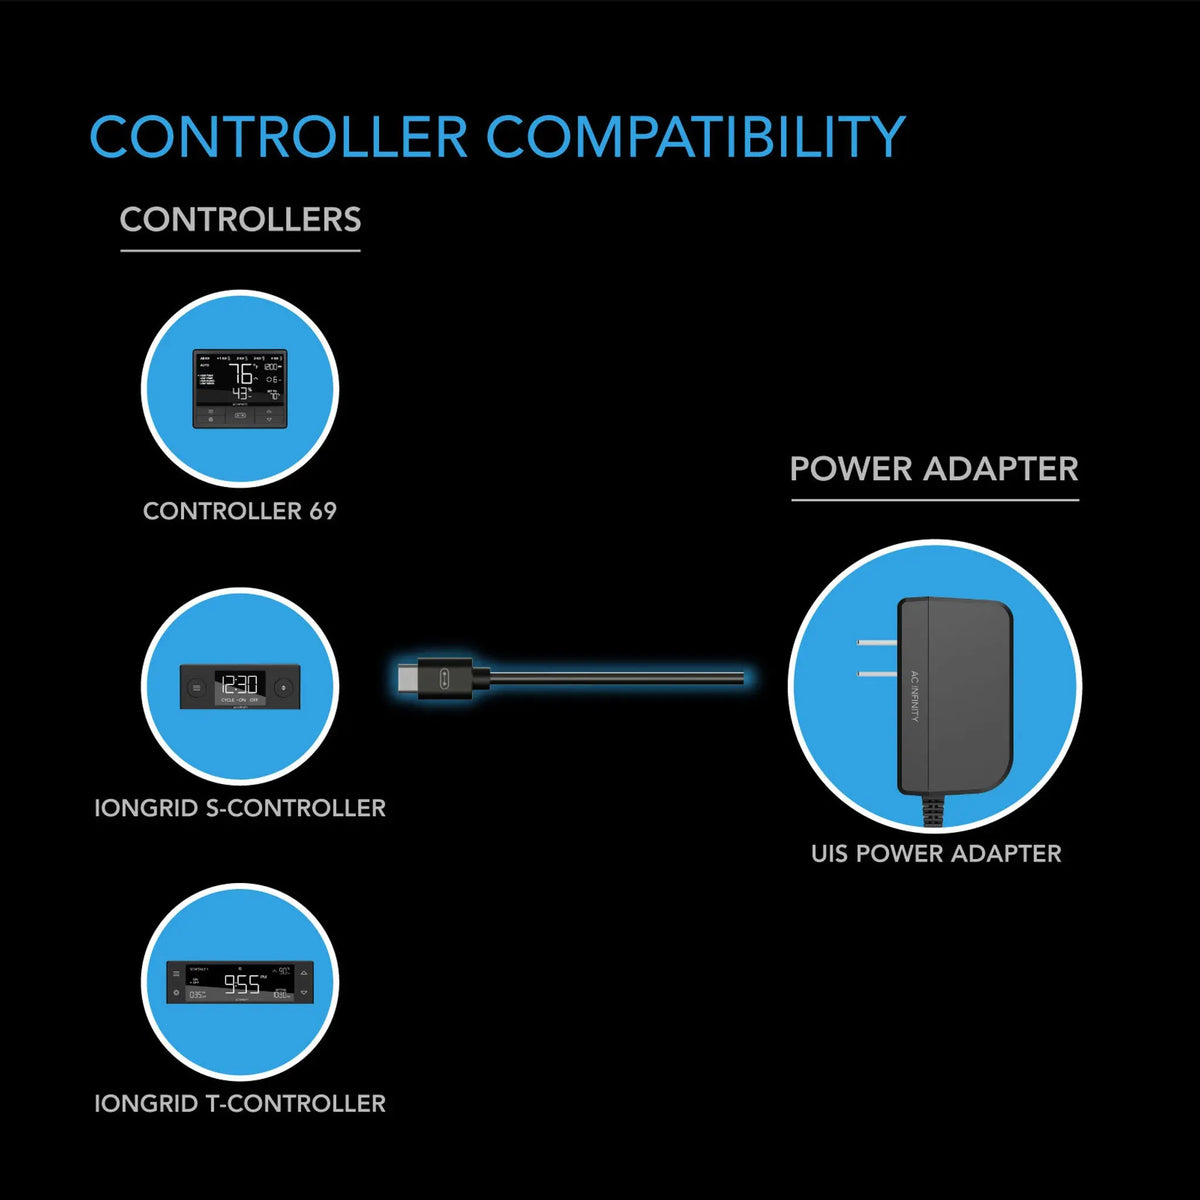 AC Infinity UIS Power Adapter, For Controllers Not Powered By UIS Devices